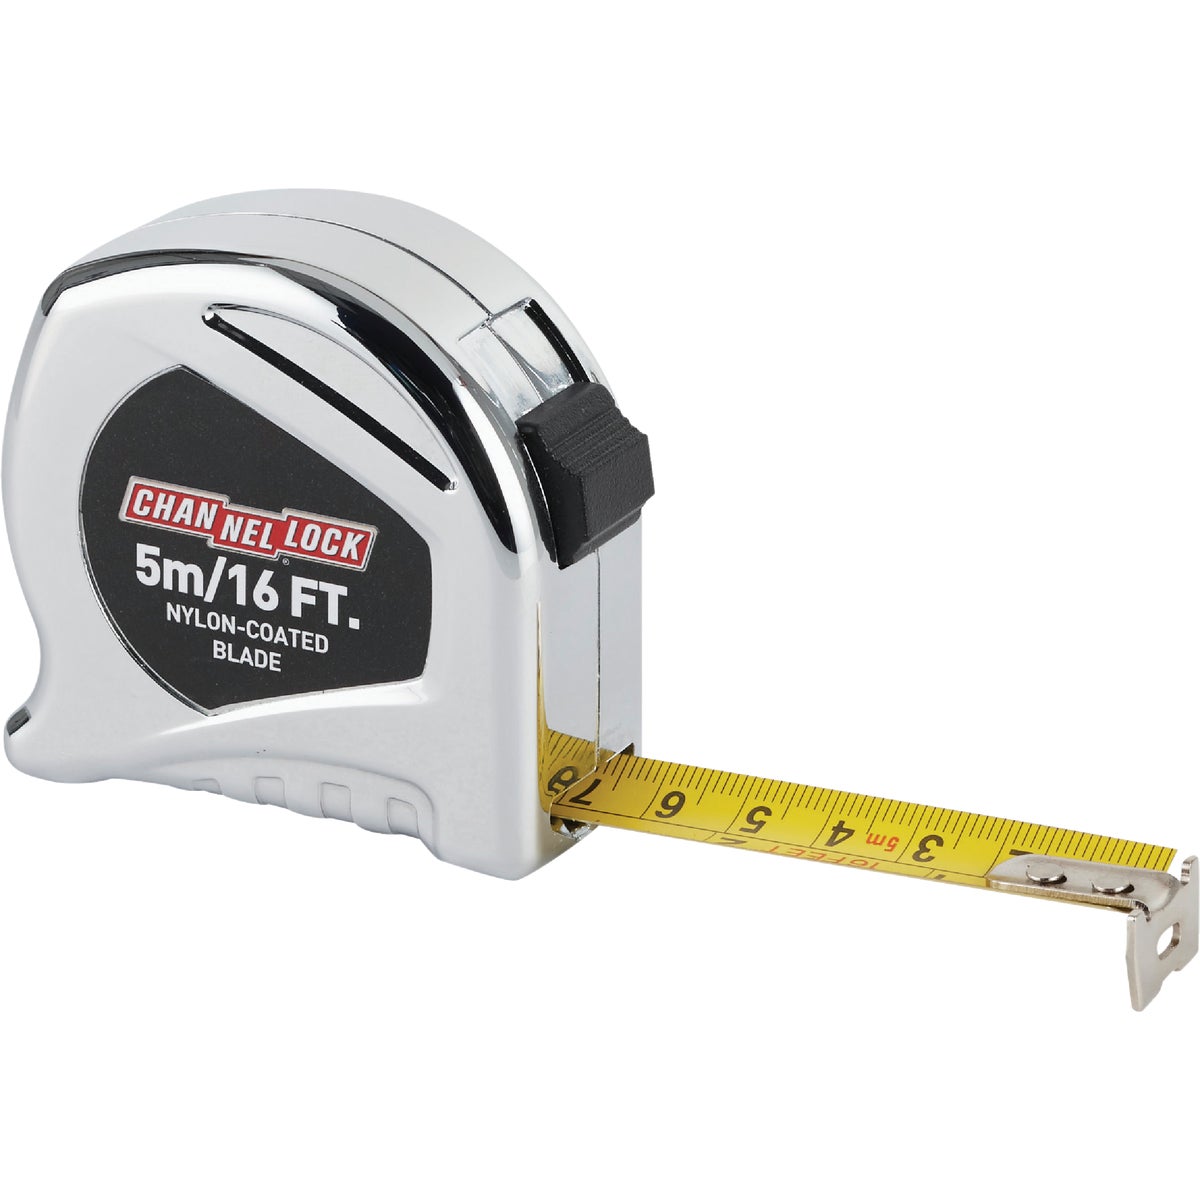 Channellock 5m/16 Ft. Metric/SAE Tape Measure